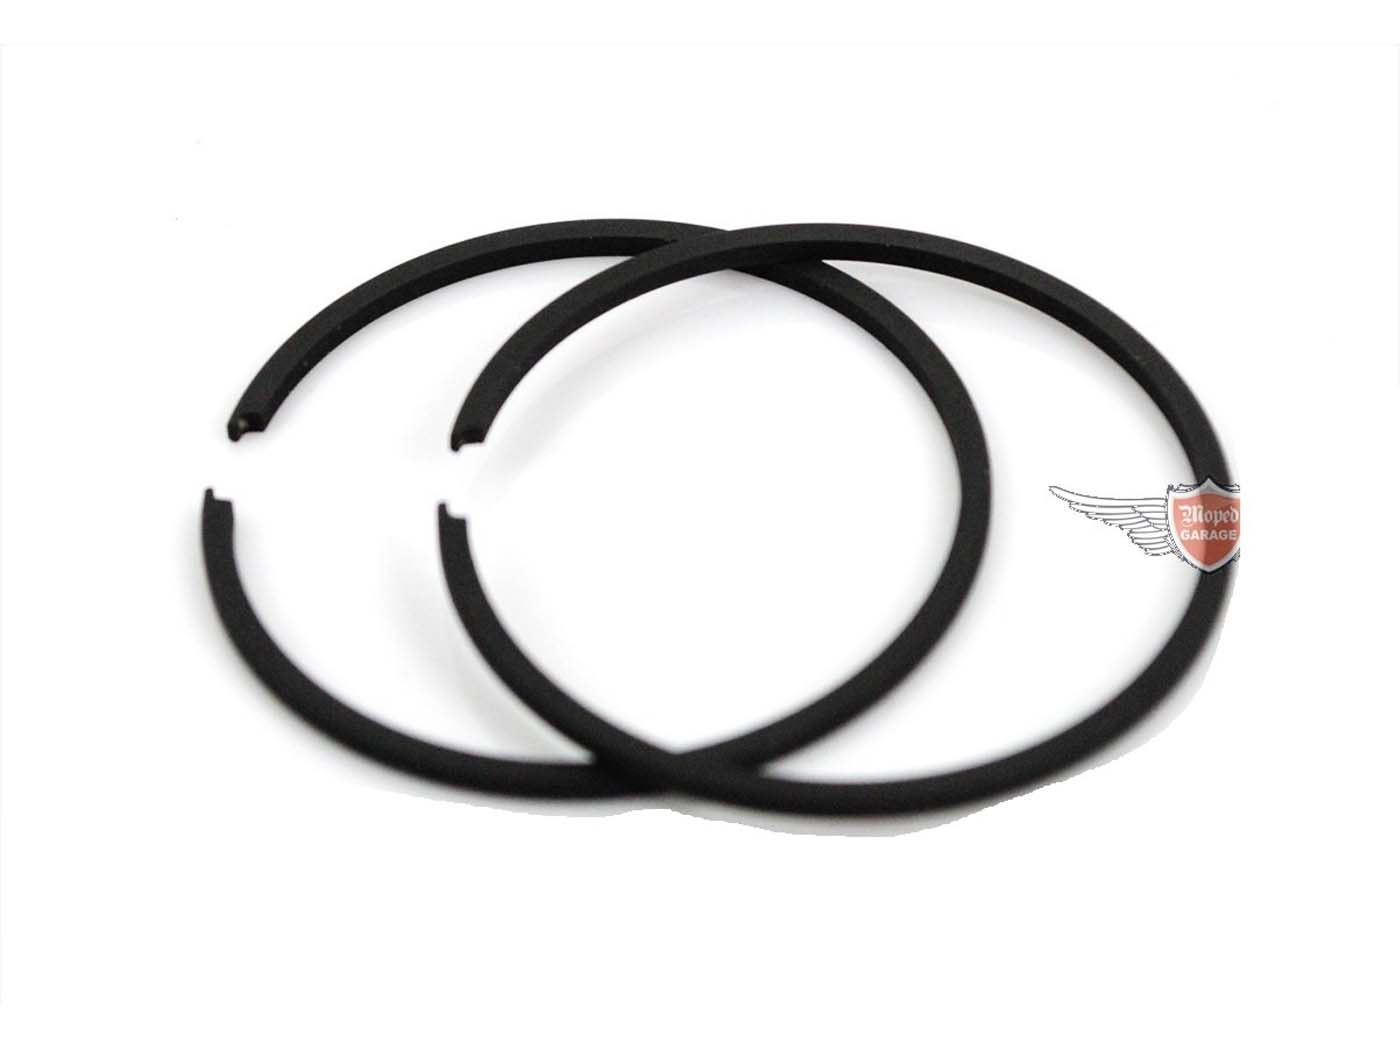 Piston Rings Airsal 40mm 50cc For Peugeot 103 104 105 106 ML MLS Vogue SP